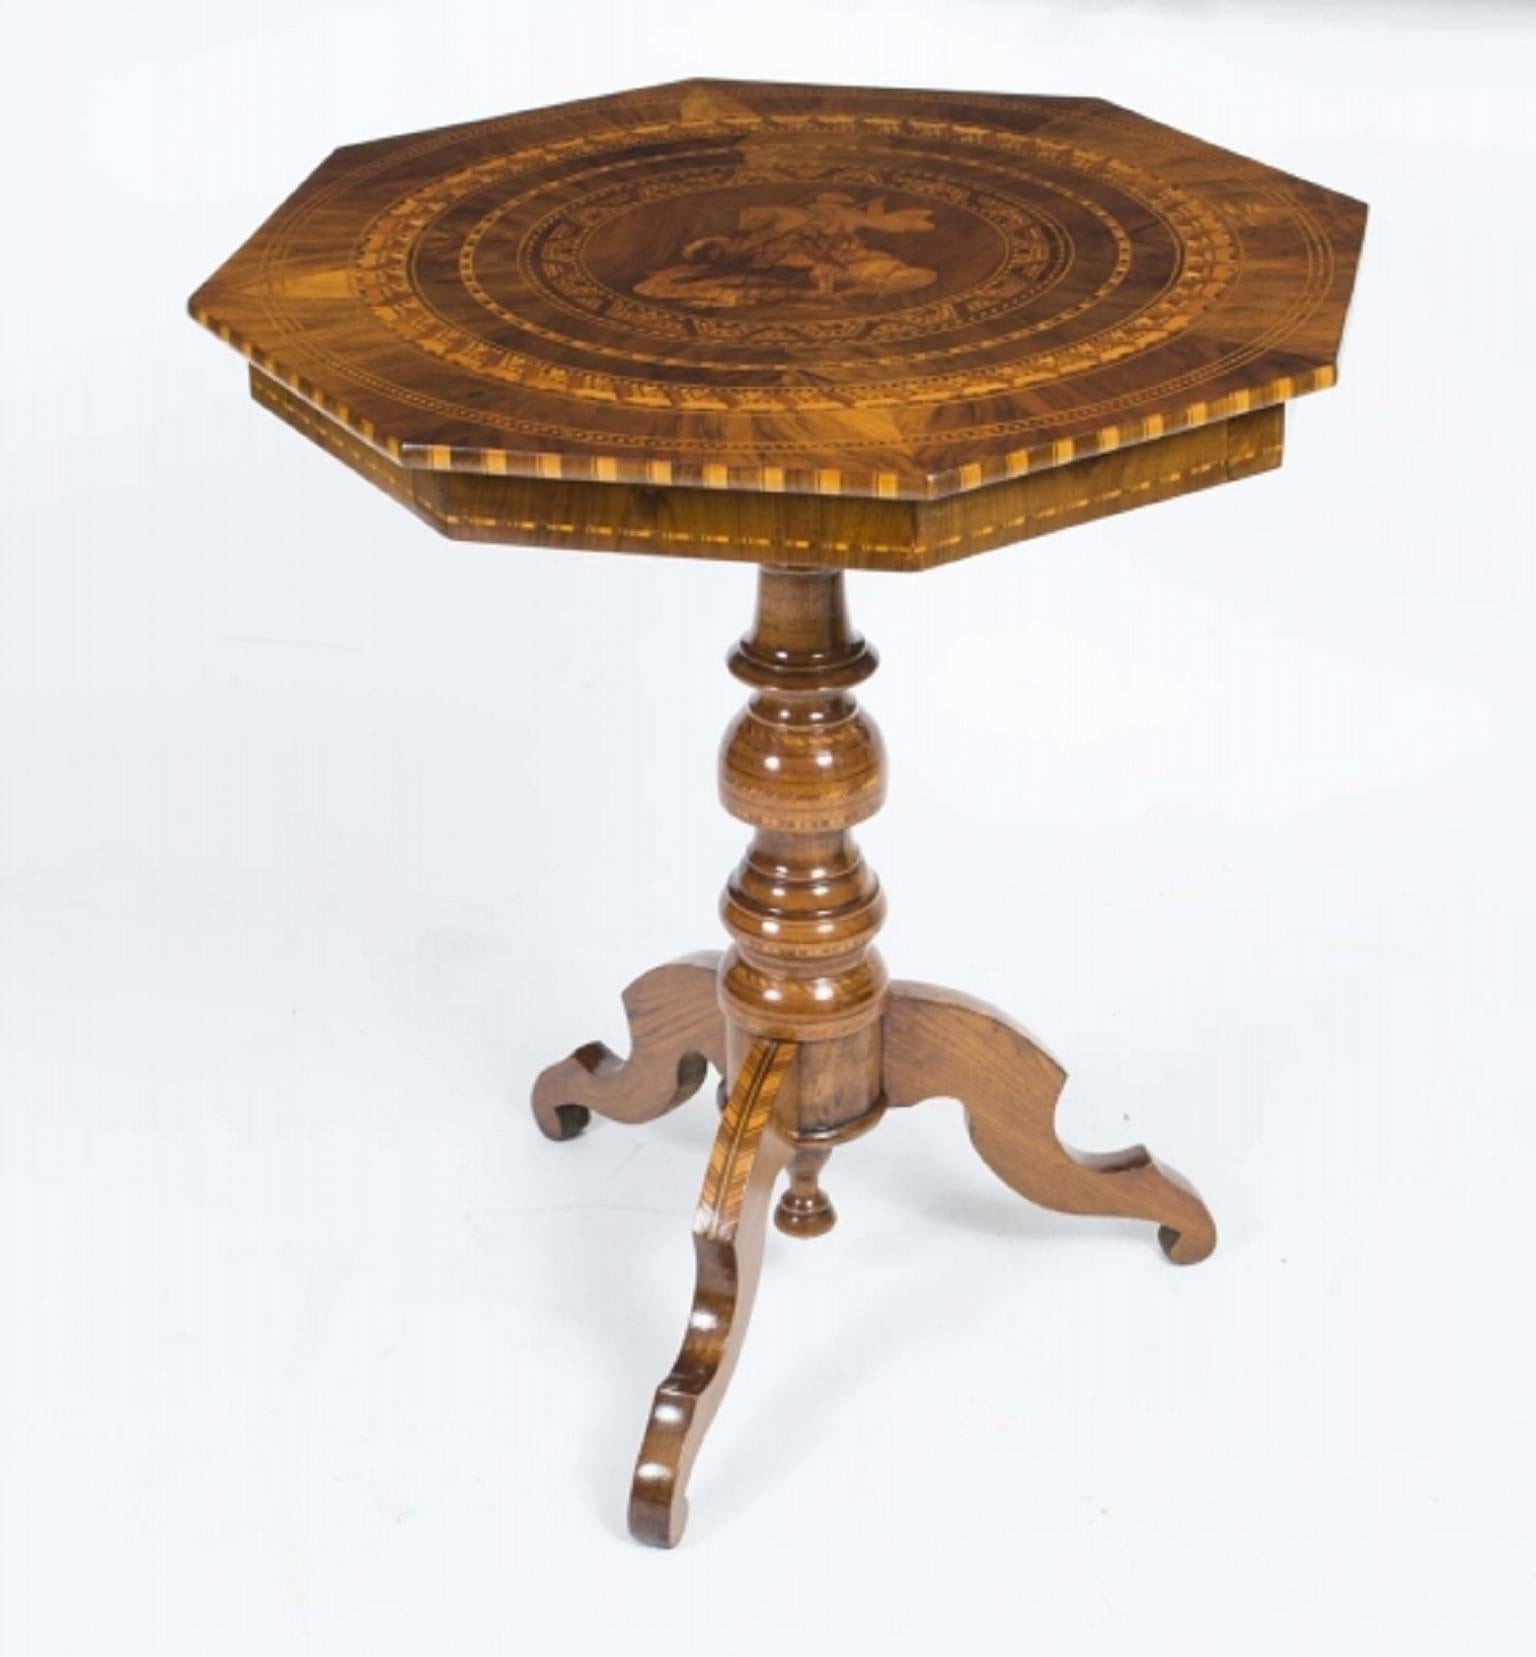 This is a beautiful antique octagonal occasional table from Sorrento in Italy, circa 1860 in date.

It was handcrafted from walnut and olive wood. The base and stem have been masterfully inlaid, in geometric patterns and the top has a wonderful